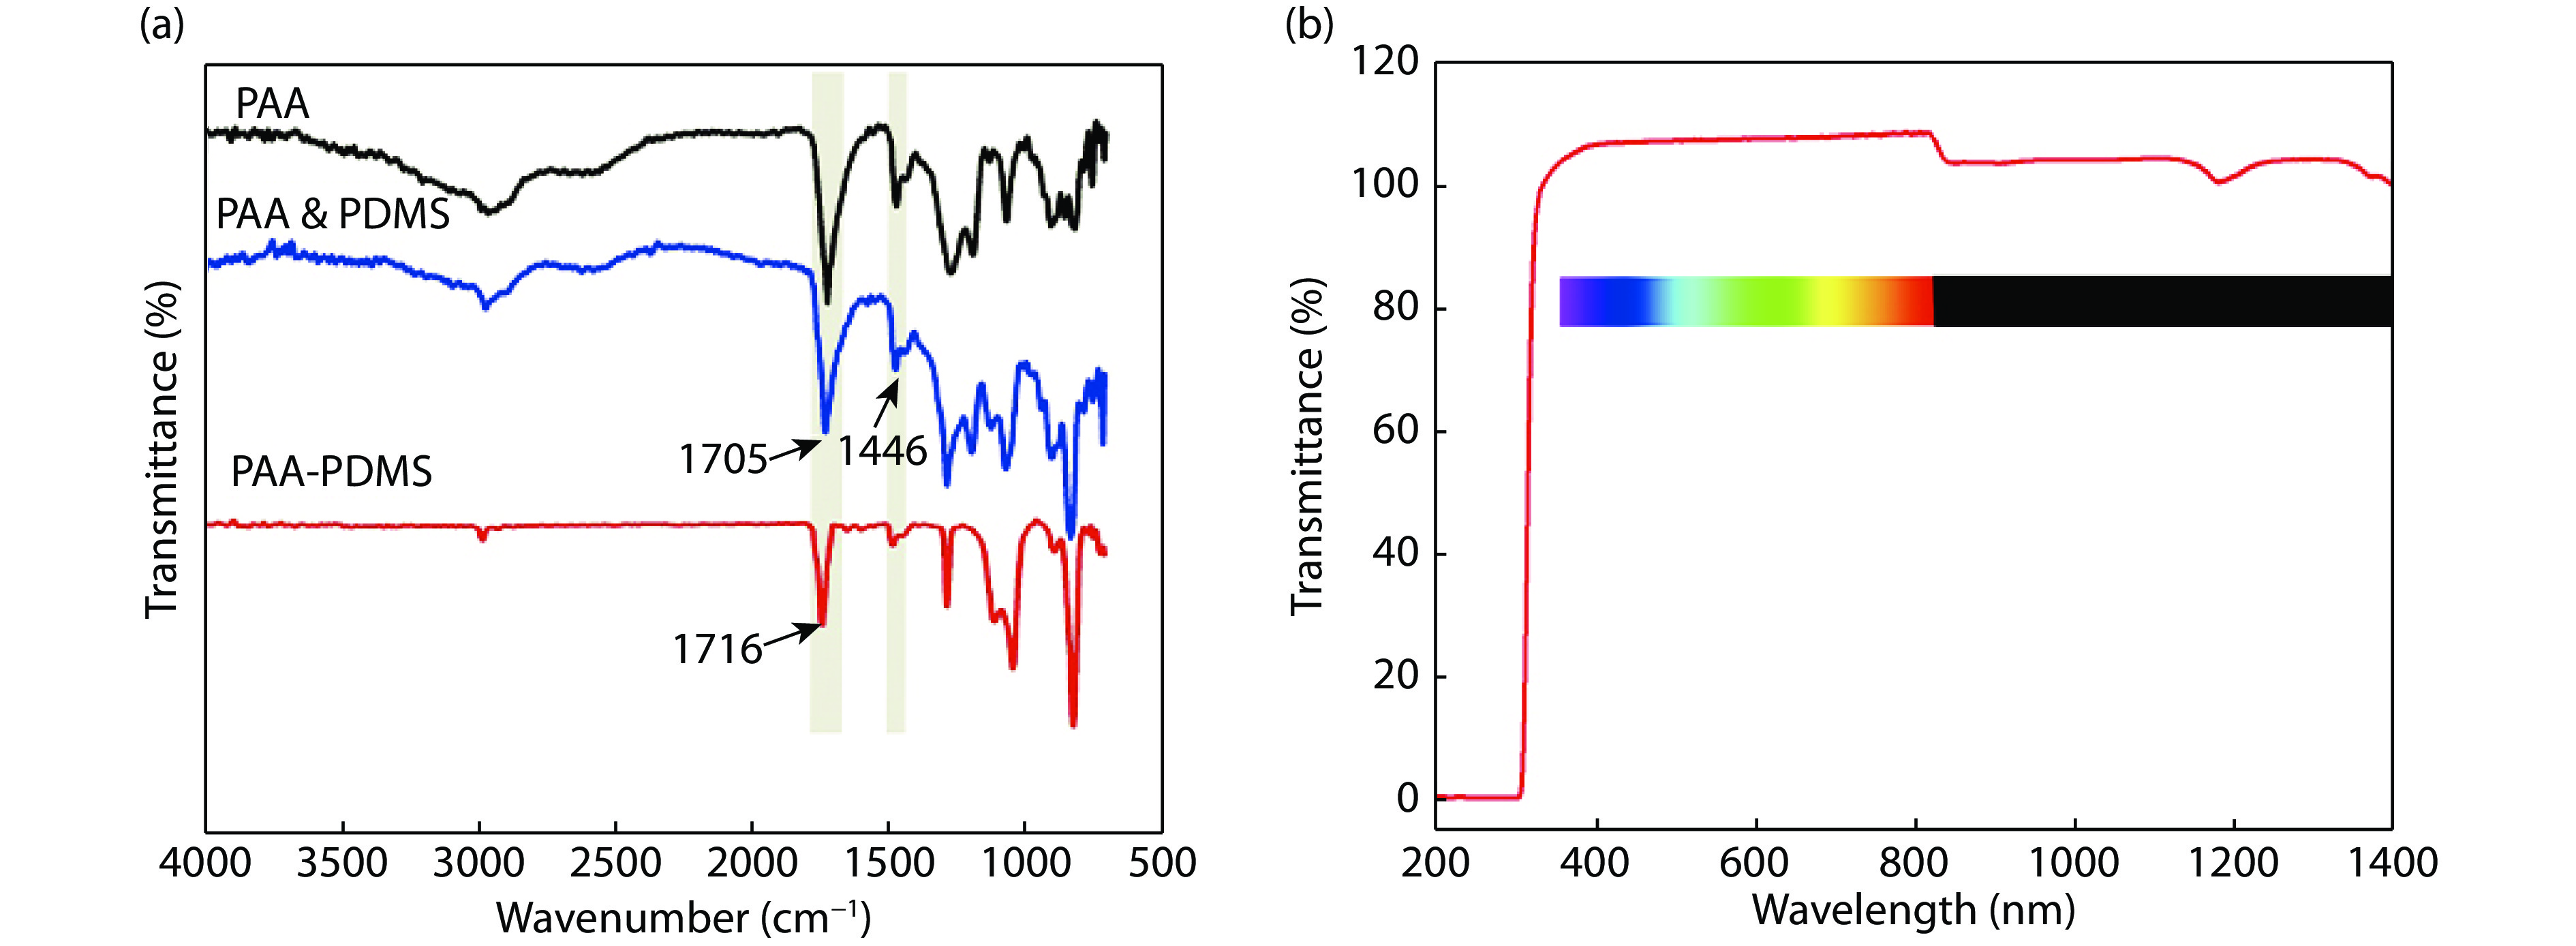 (Color online) (a) ATR-FTIR and (b) UV spectra of neat PAA, PAA & PDMS and PAA-PDMS materials.